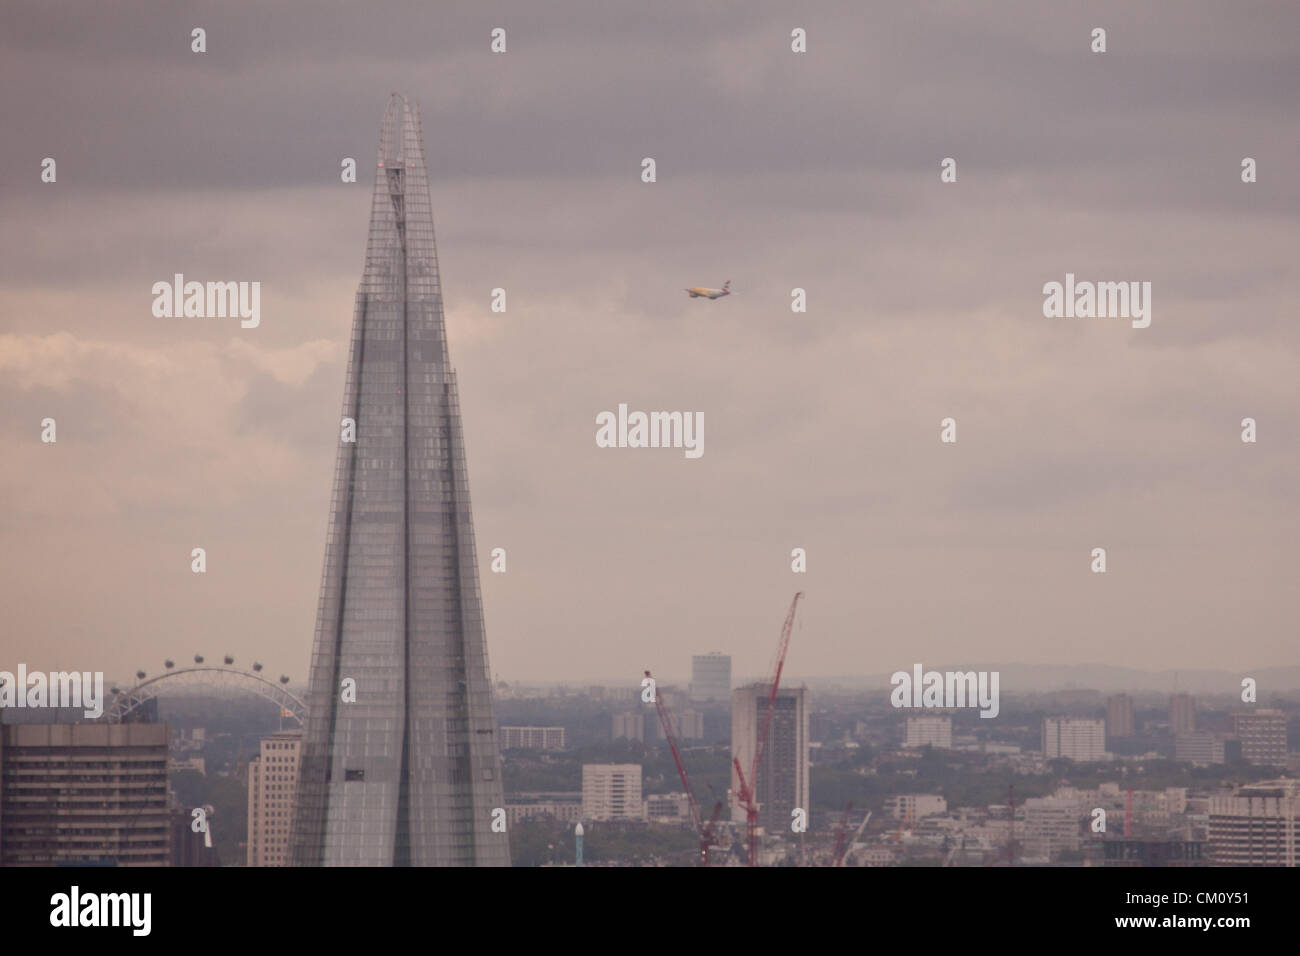 LONDON, UK, 10th Sep, 2012. The British Airways Airbus 'Firefly' performs a flypast over London as a tribute to the Team GB Olympic and Paralympic athletes. Credit:  Steve Bright / Alamy Live News Stock Photo